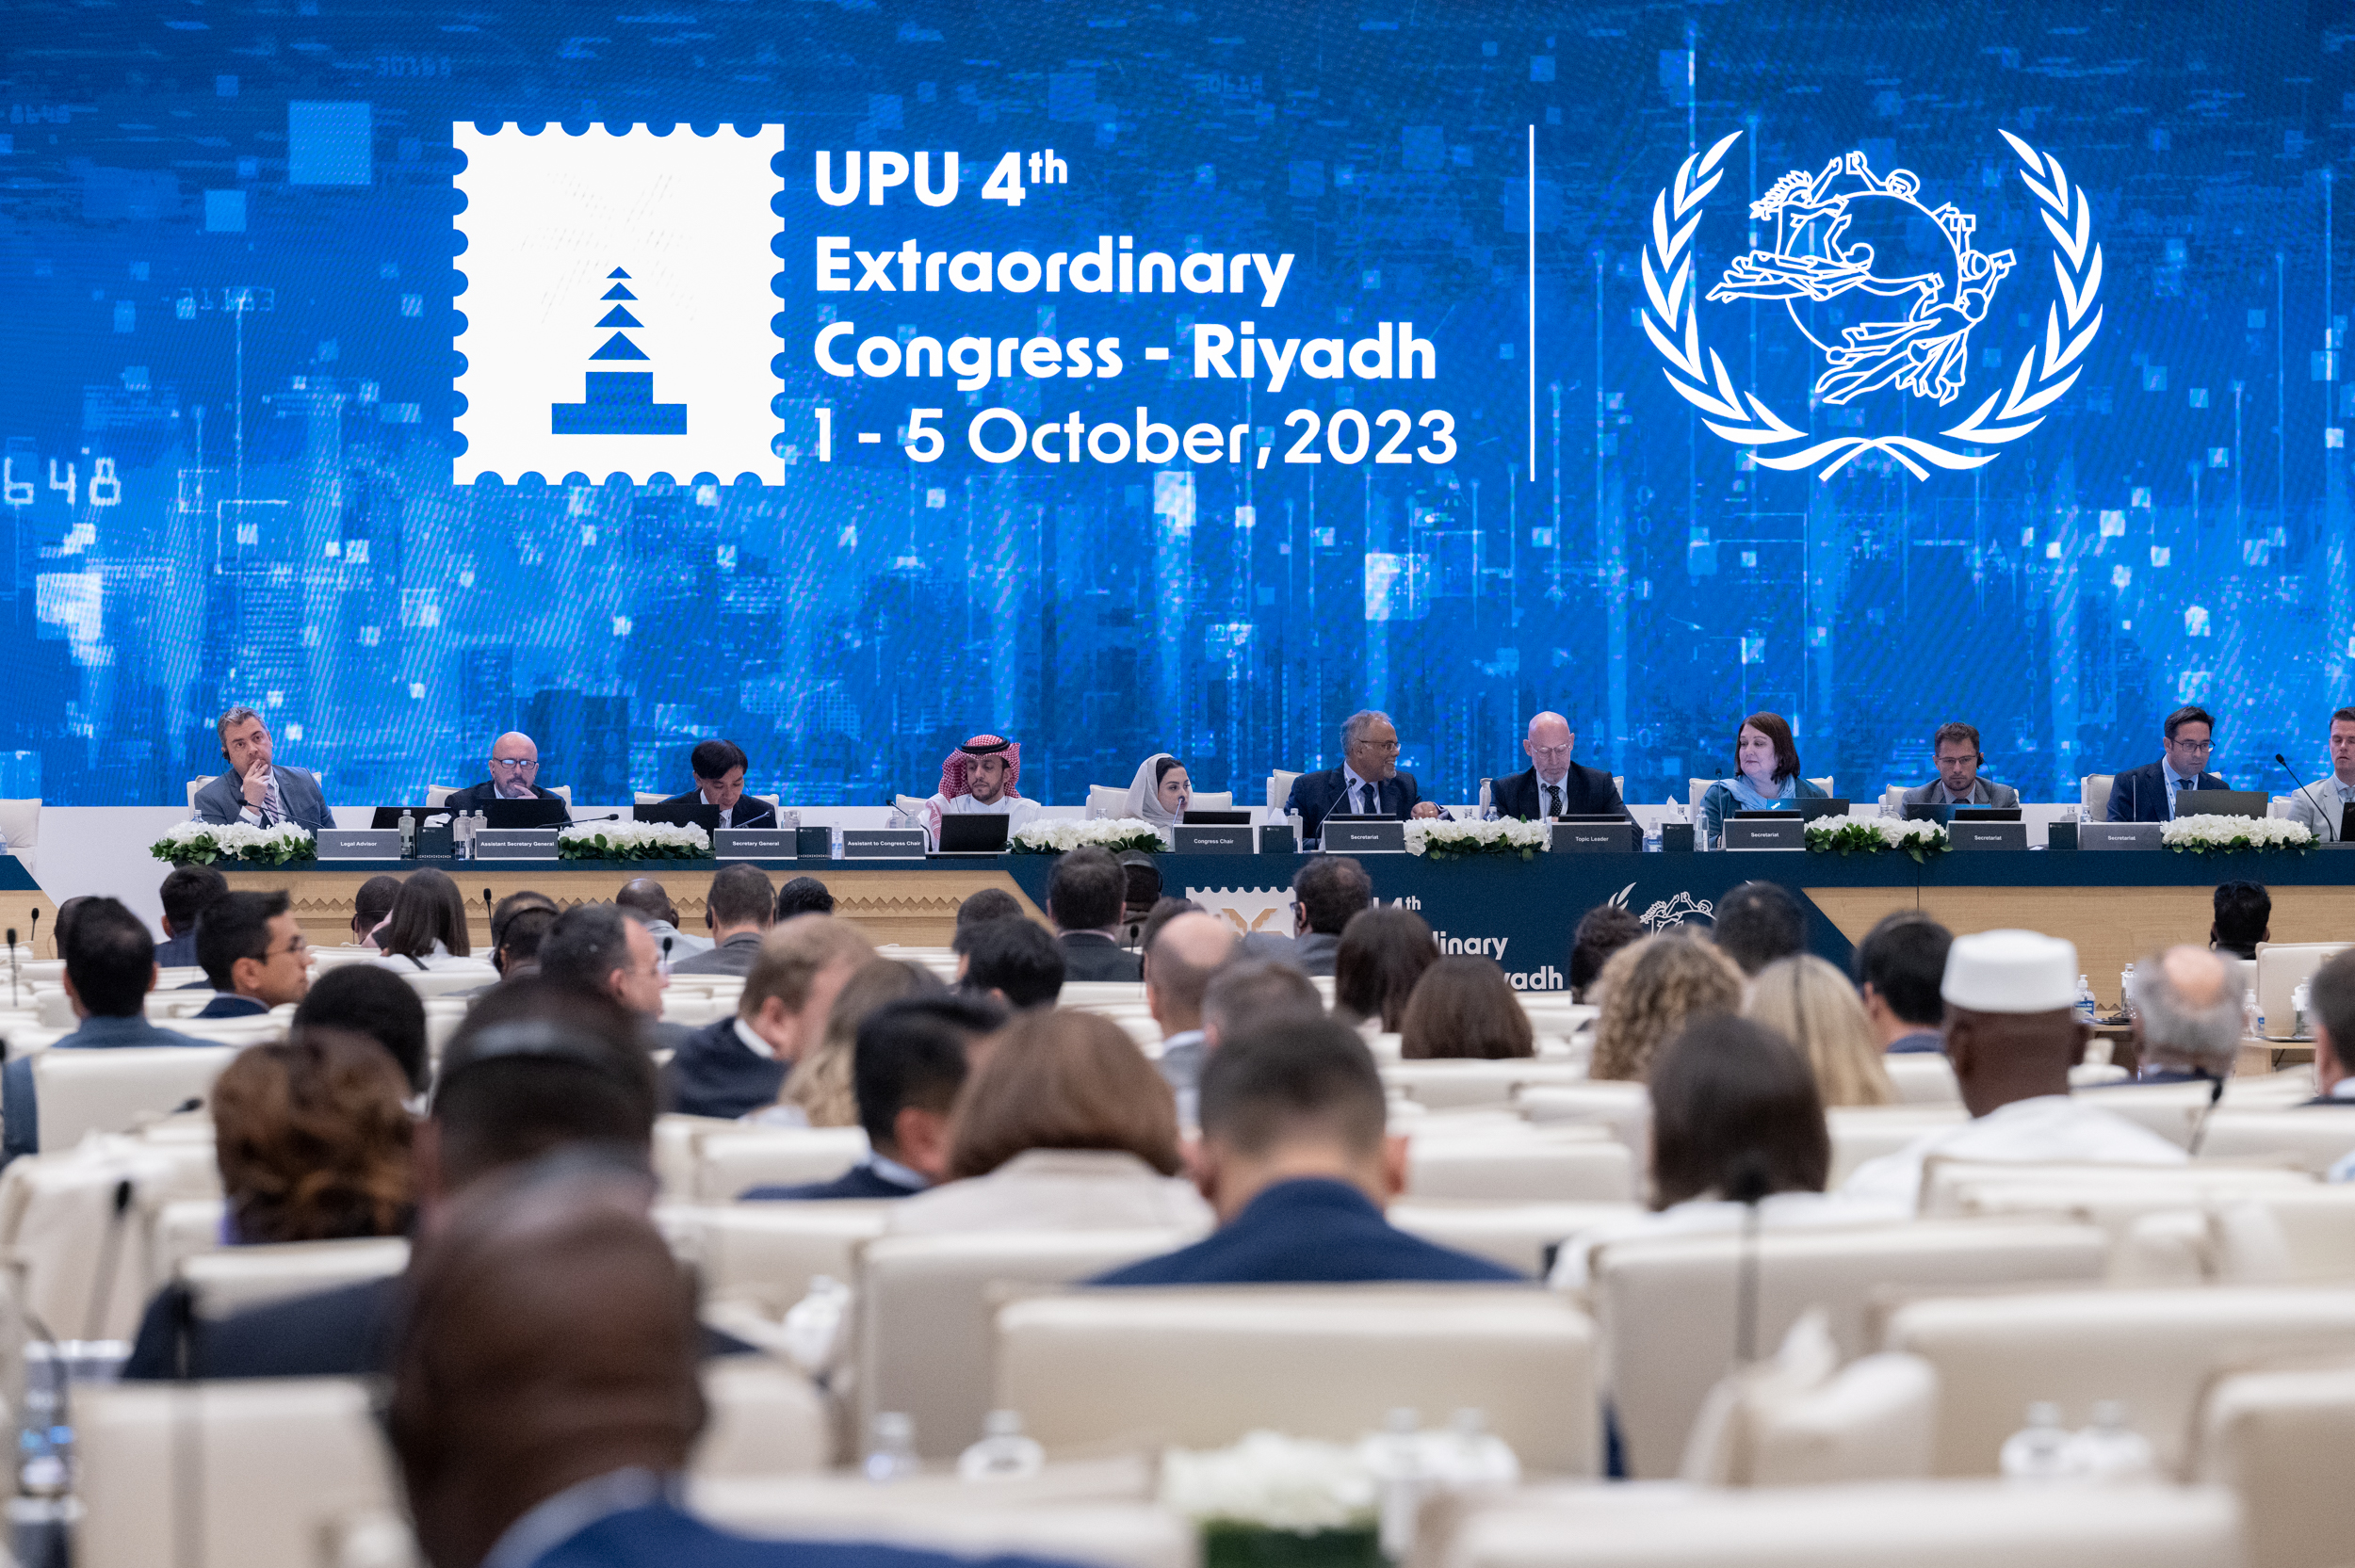 UPU paves path for climate action and postal financial services